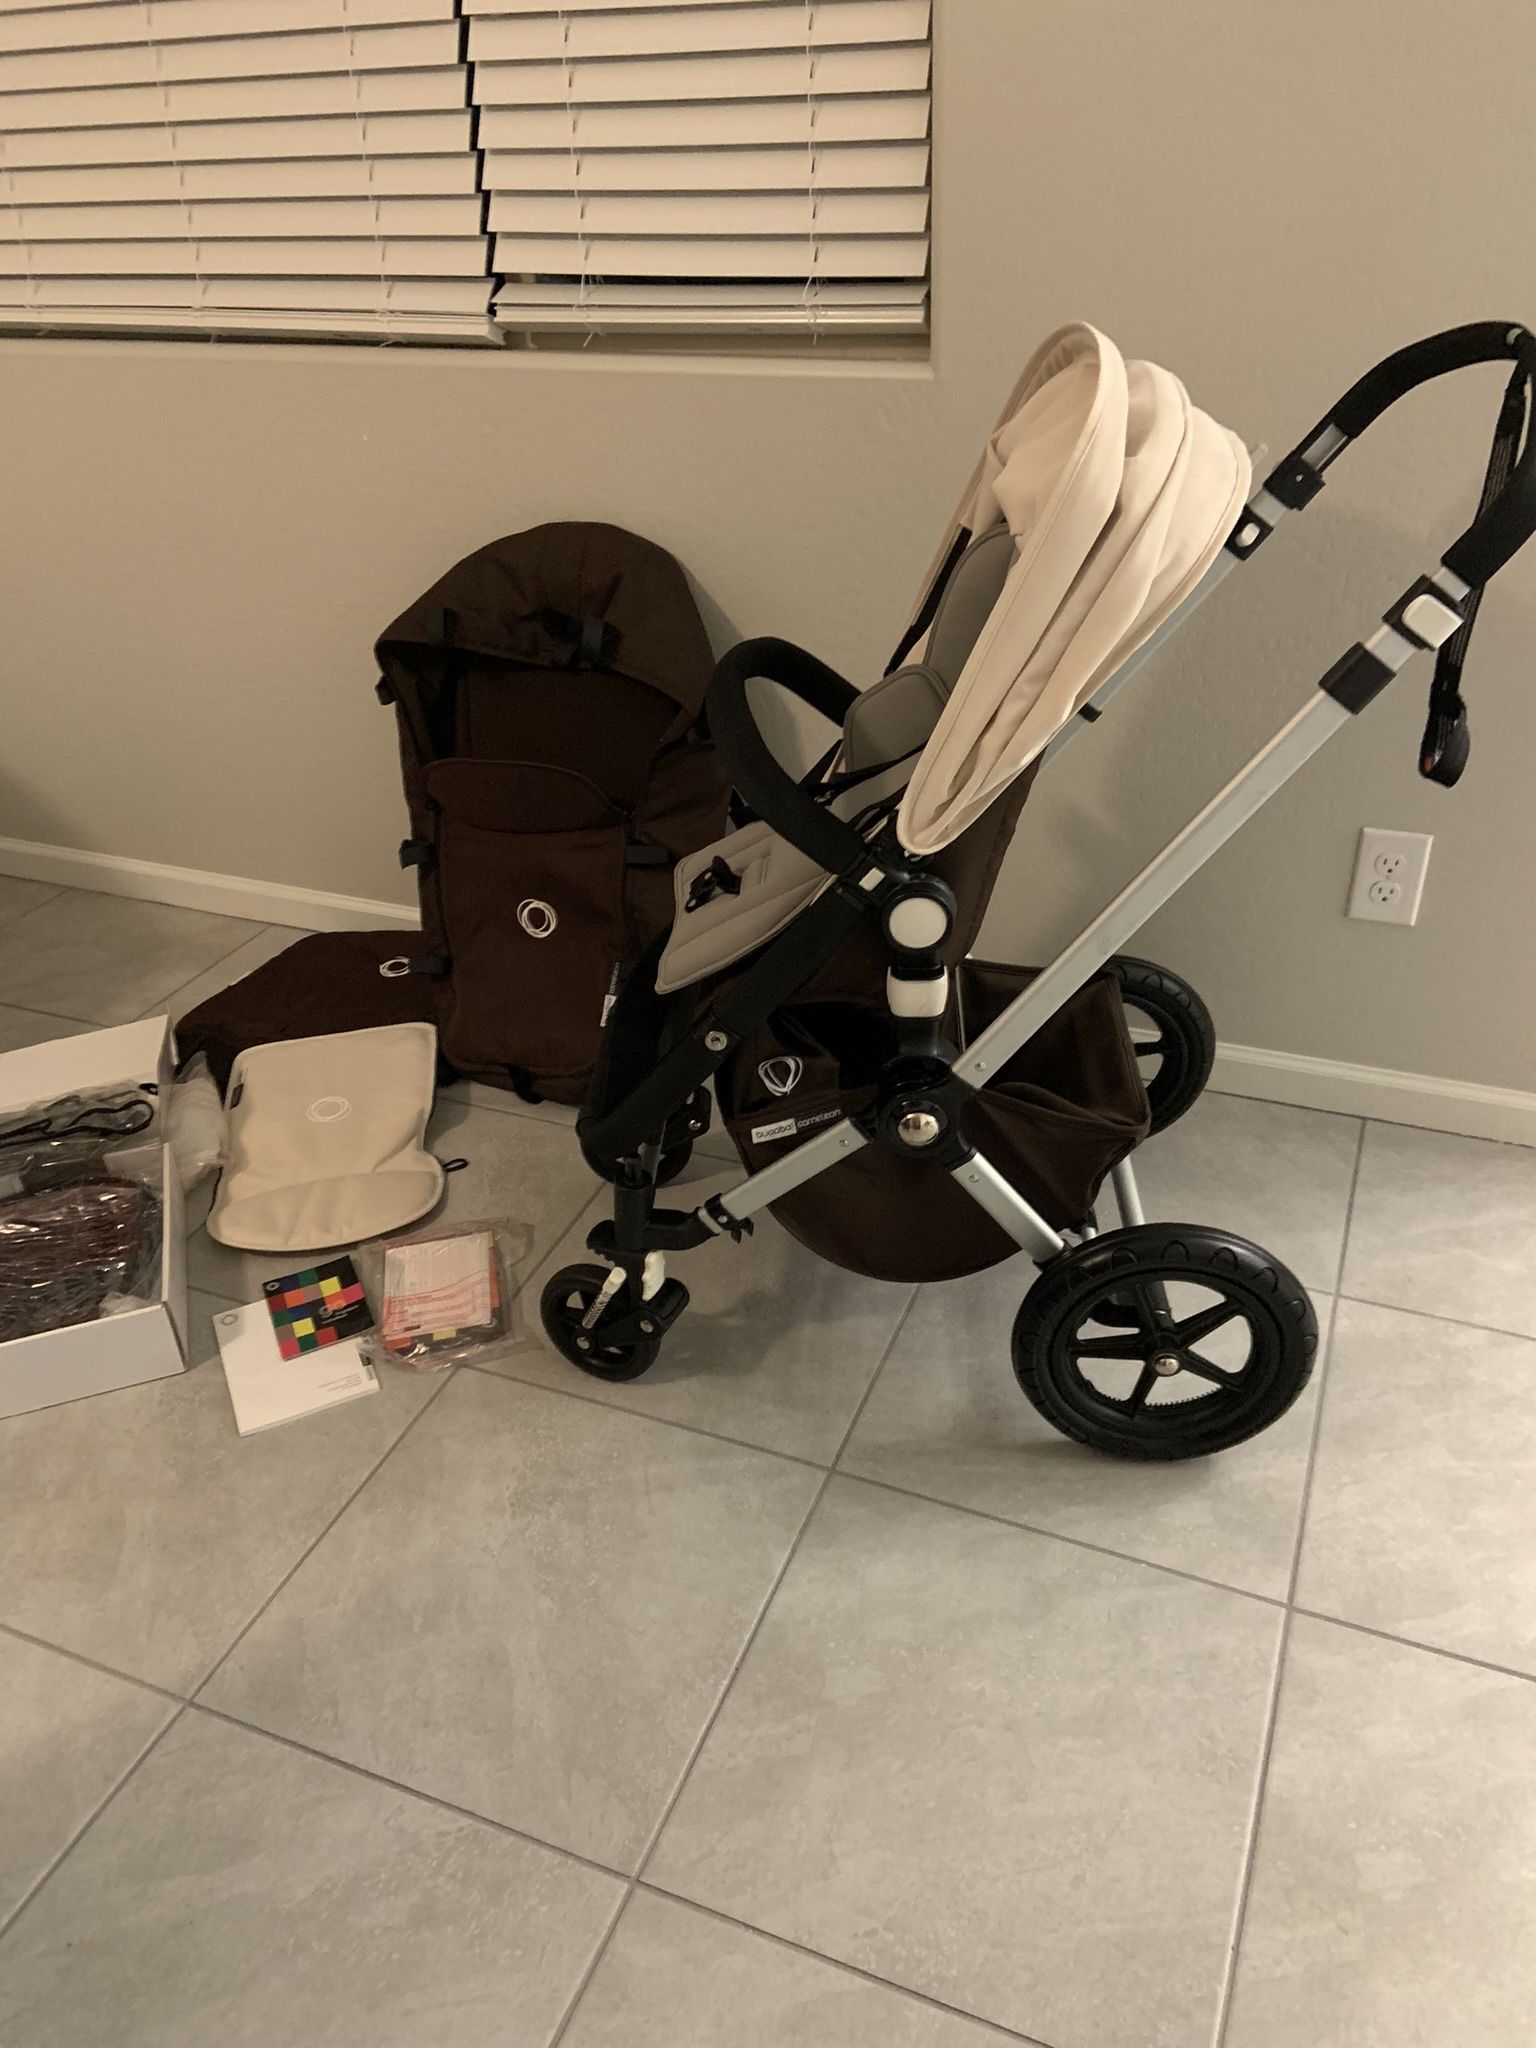 Bugaboo Chameleon 3 Stroller With Many Extras Carrycot Rain Cover Brown And Sand